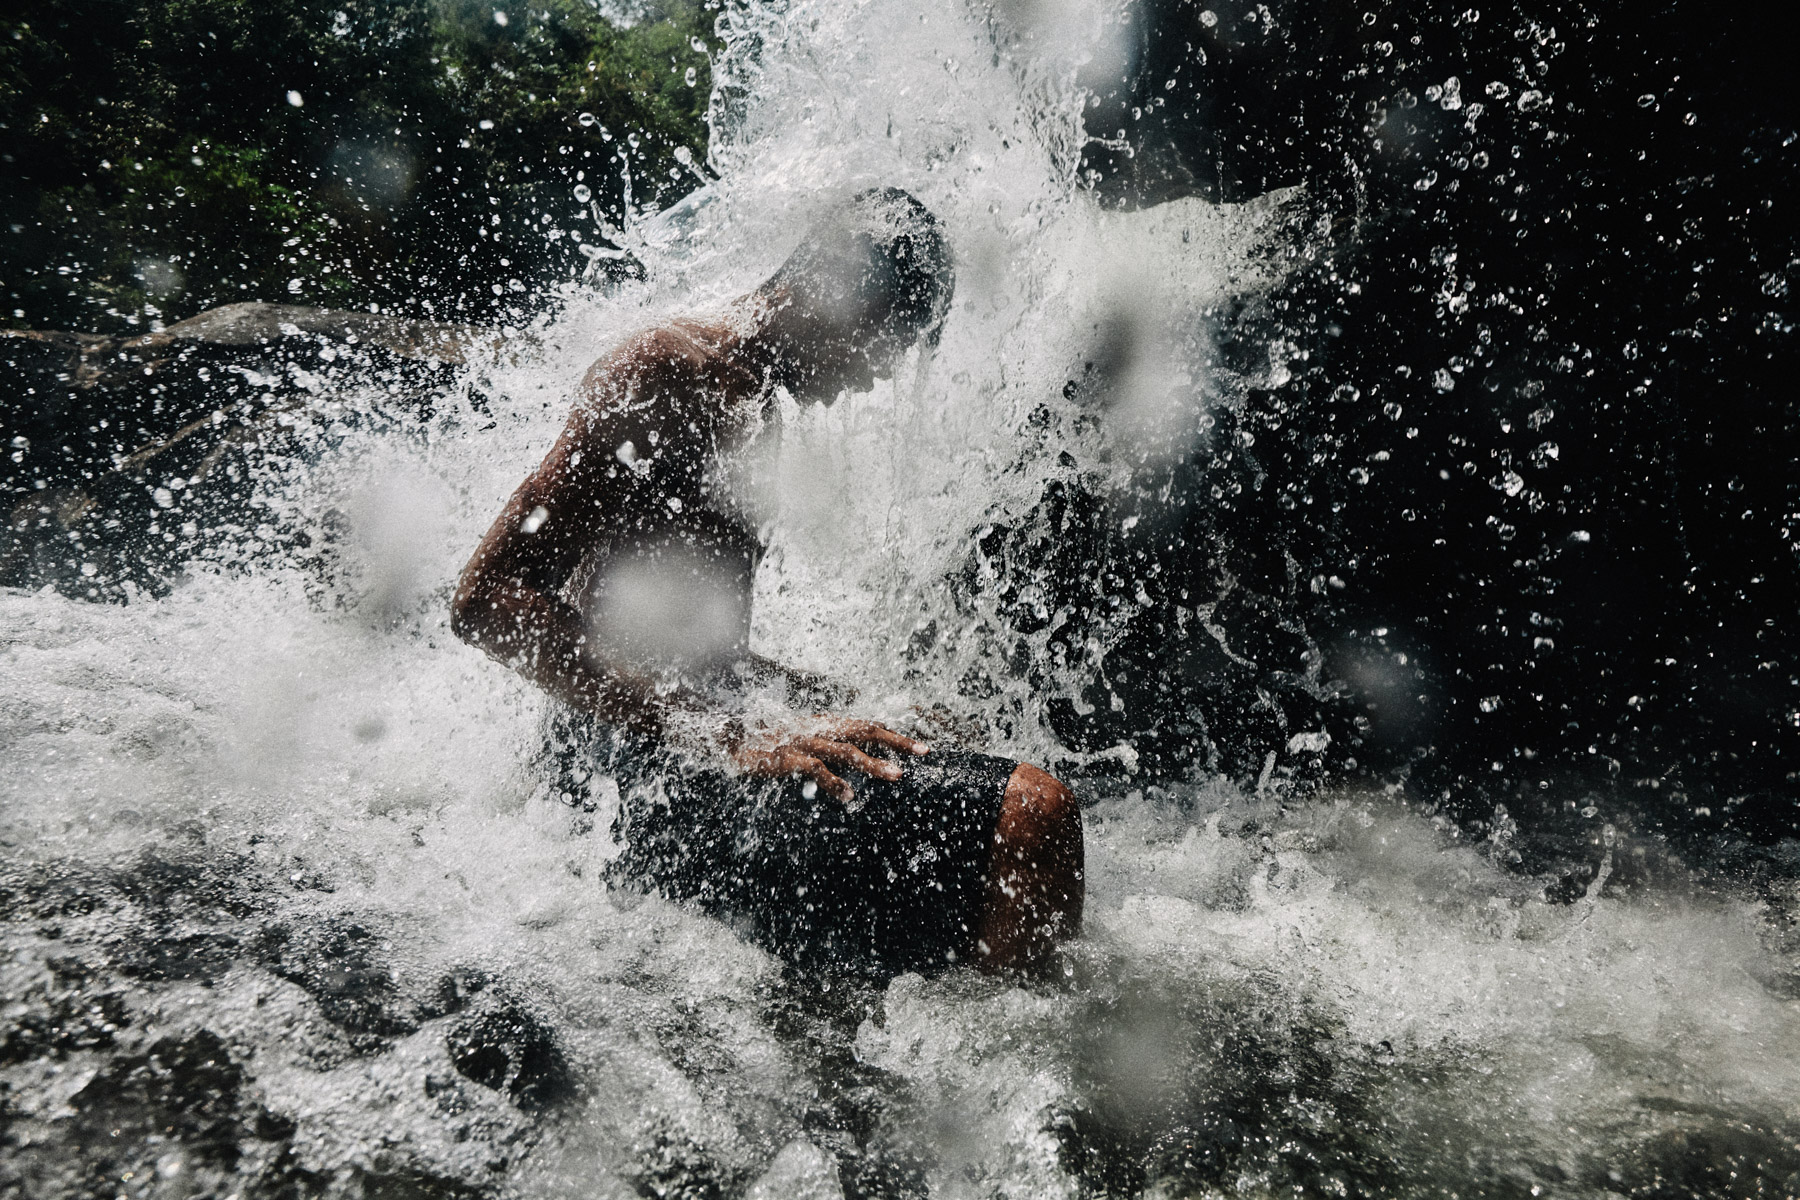 A young man gets splashed by a waterfall in Koh Kong, Cambodia.